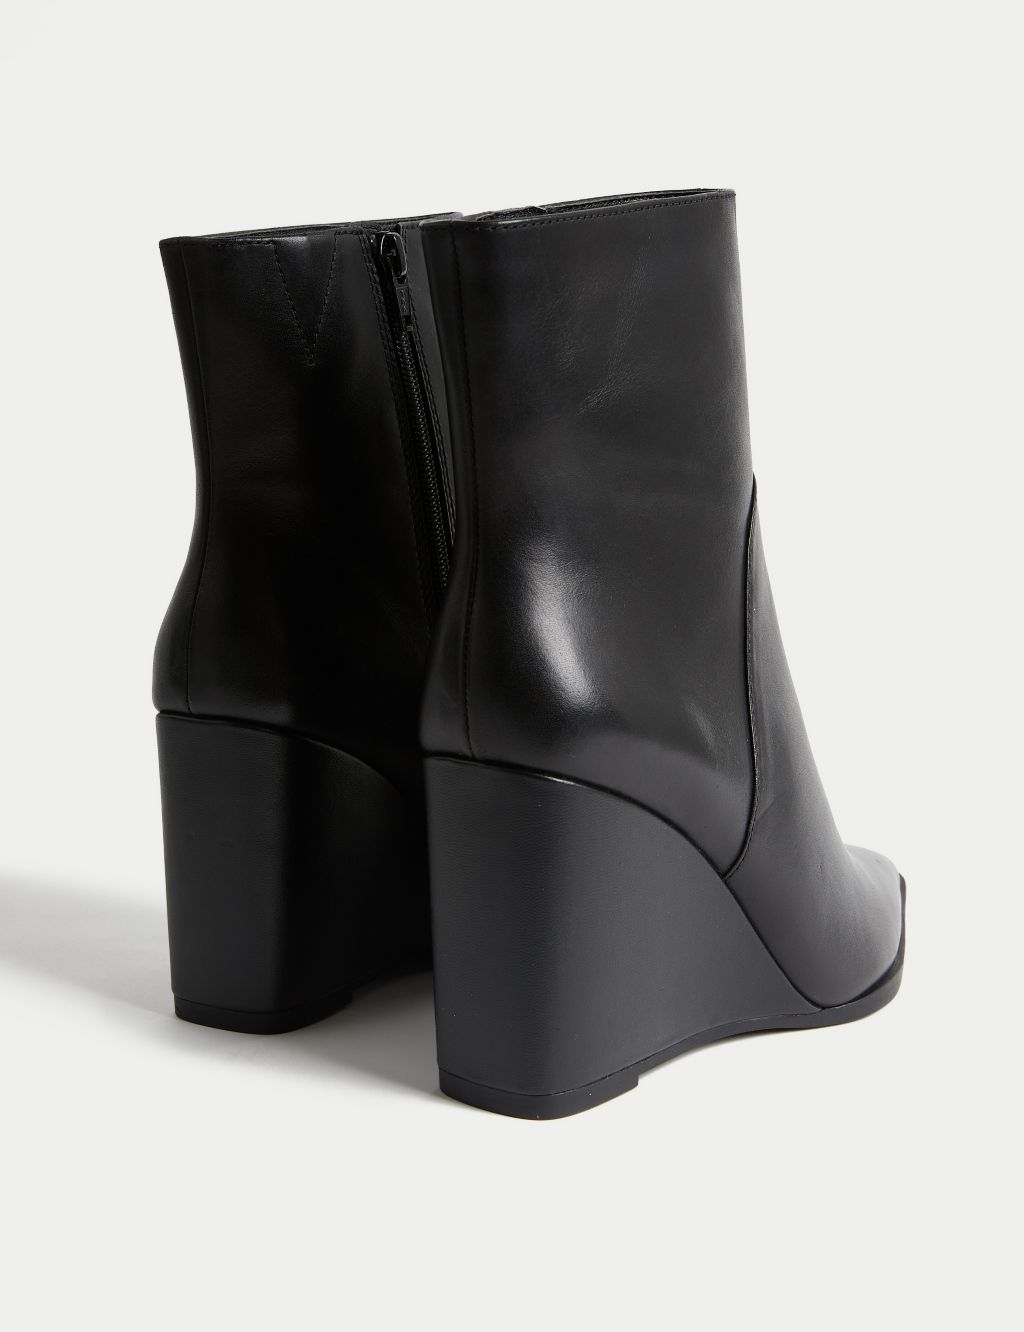 Leather Wedge Pointed Ankle Boots image 3